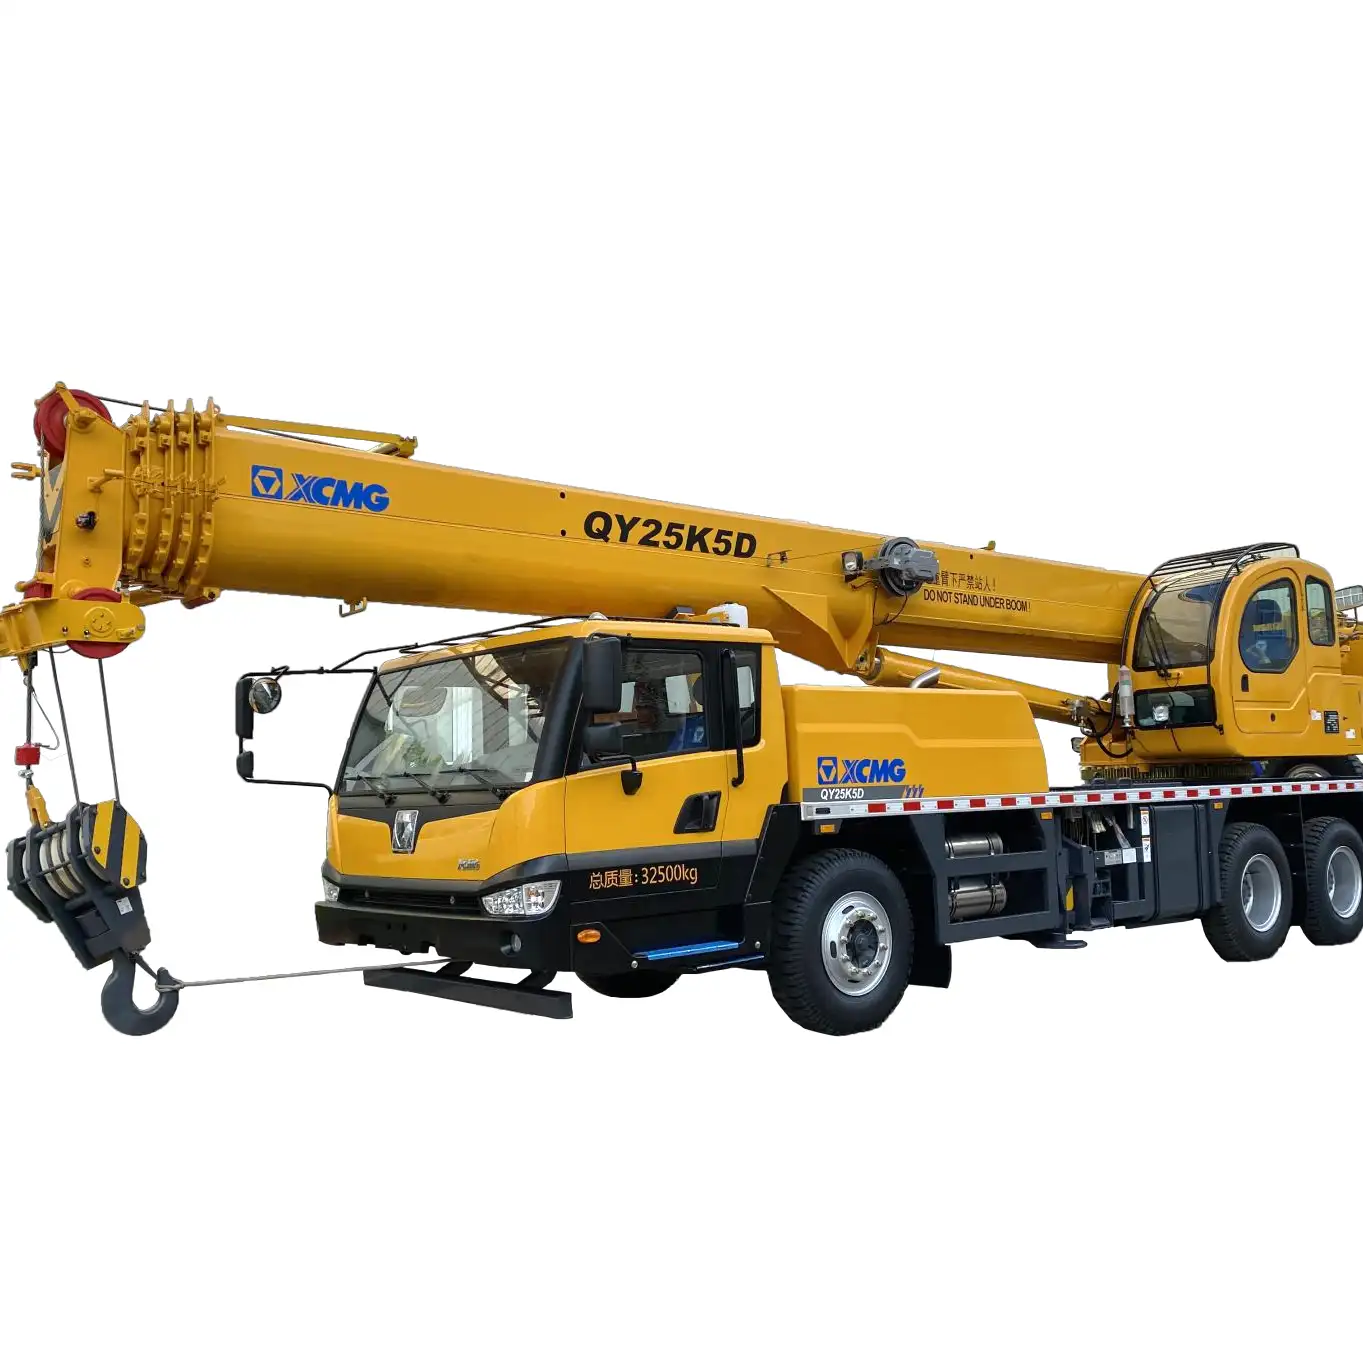 China xuzhou made Mobile Truck Crane QY25K5D 25 ton Heavy Lifting Crane factory price for sale